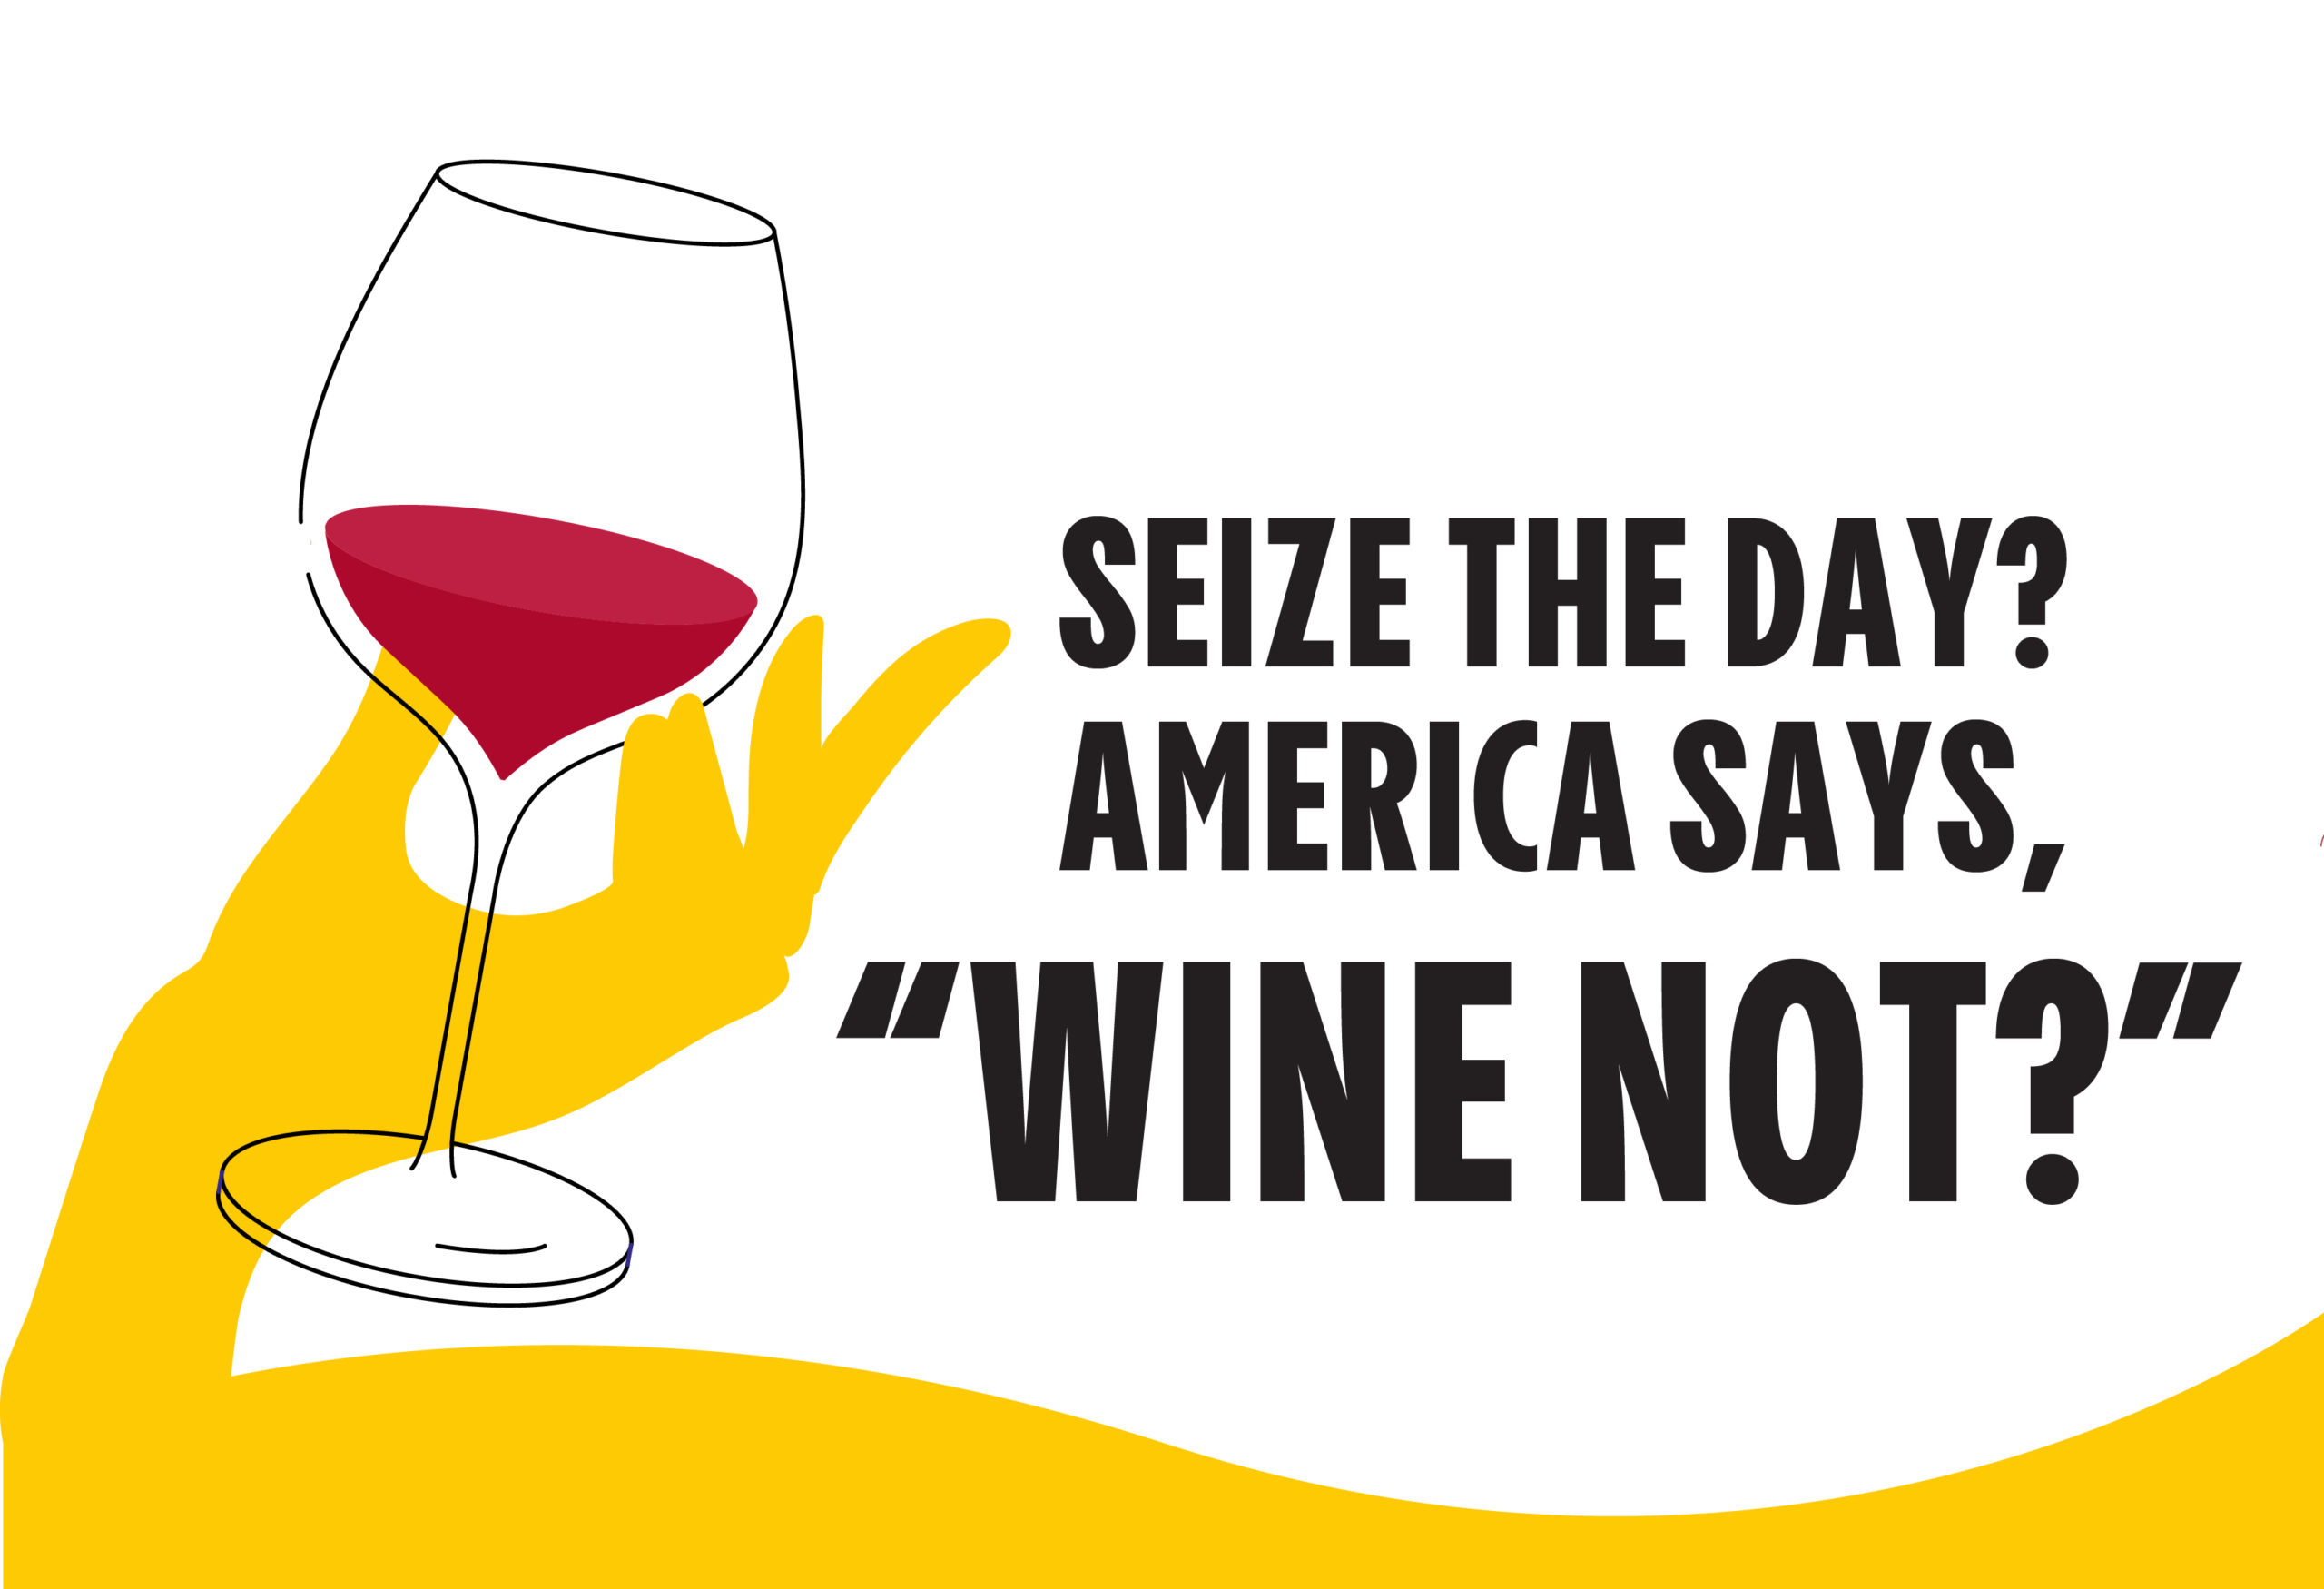 Seize the Day! JaM Cellars Conducts a Survey on Treating Yourself Post-Pandemic